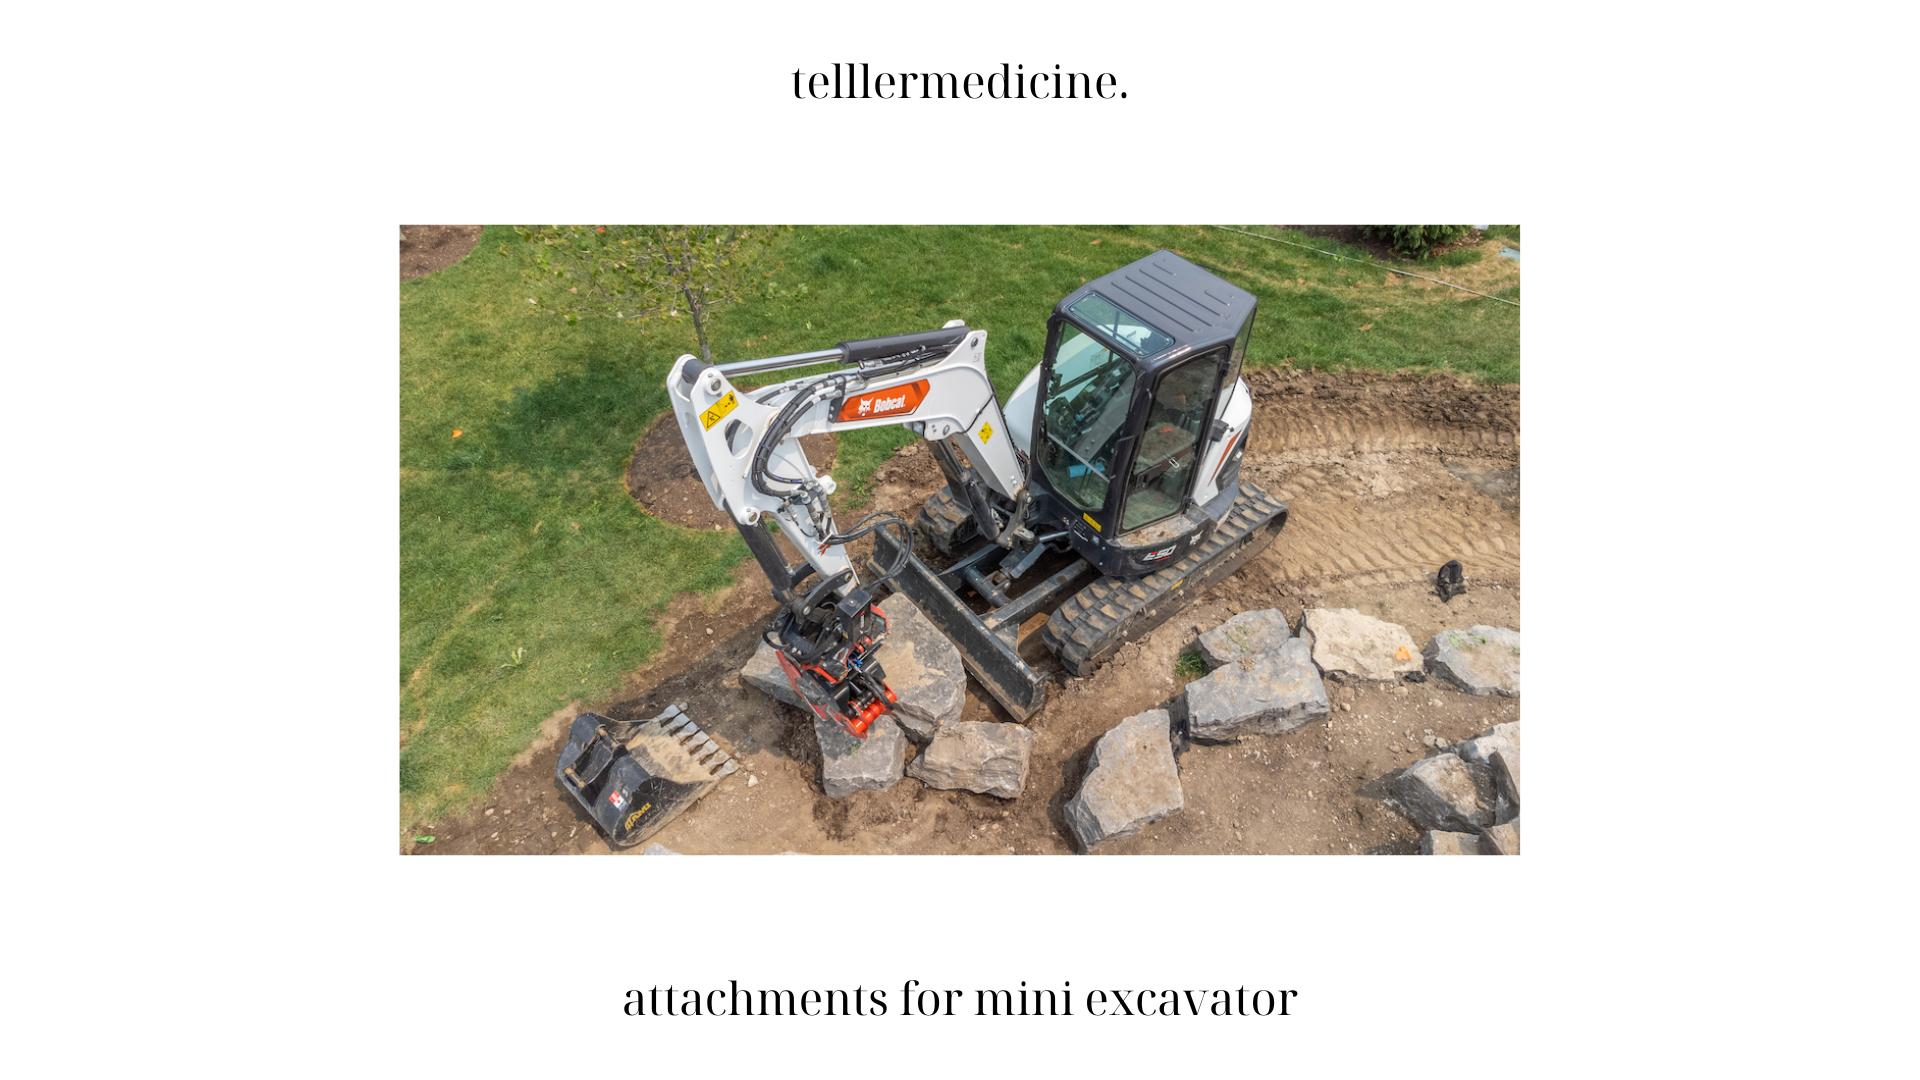 Attachments for Mini Excavator: Enhancing Versatility and Productivity